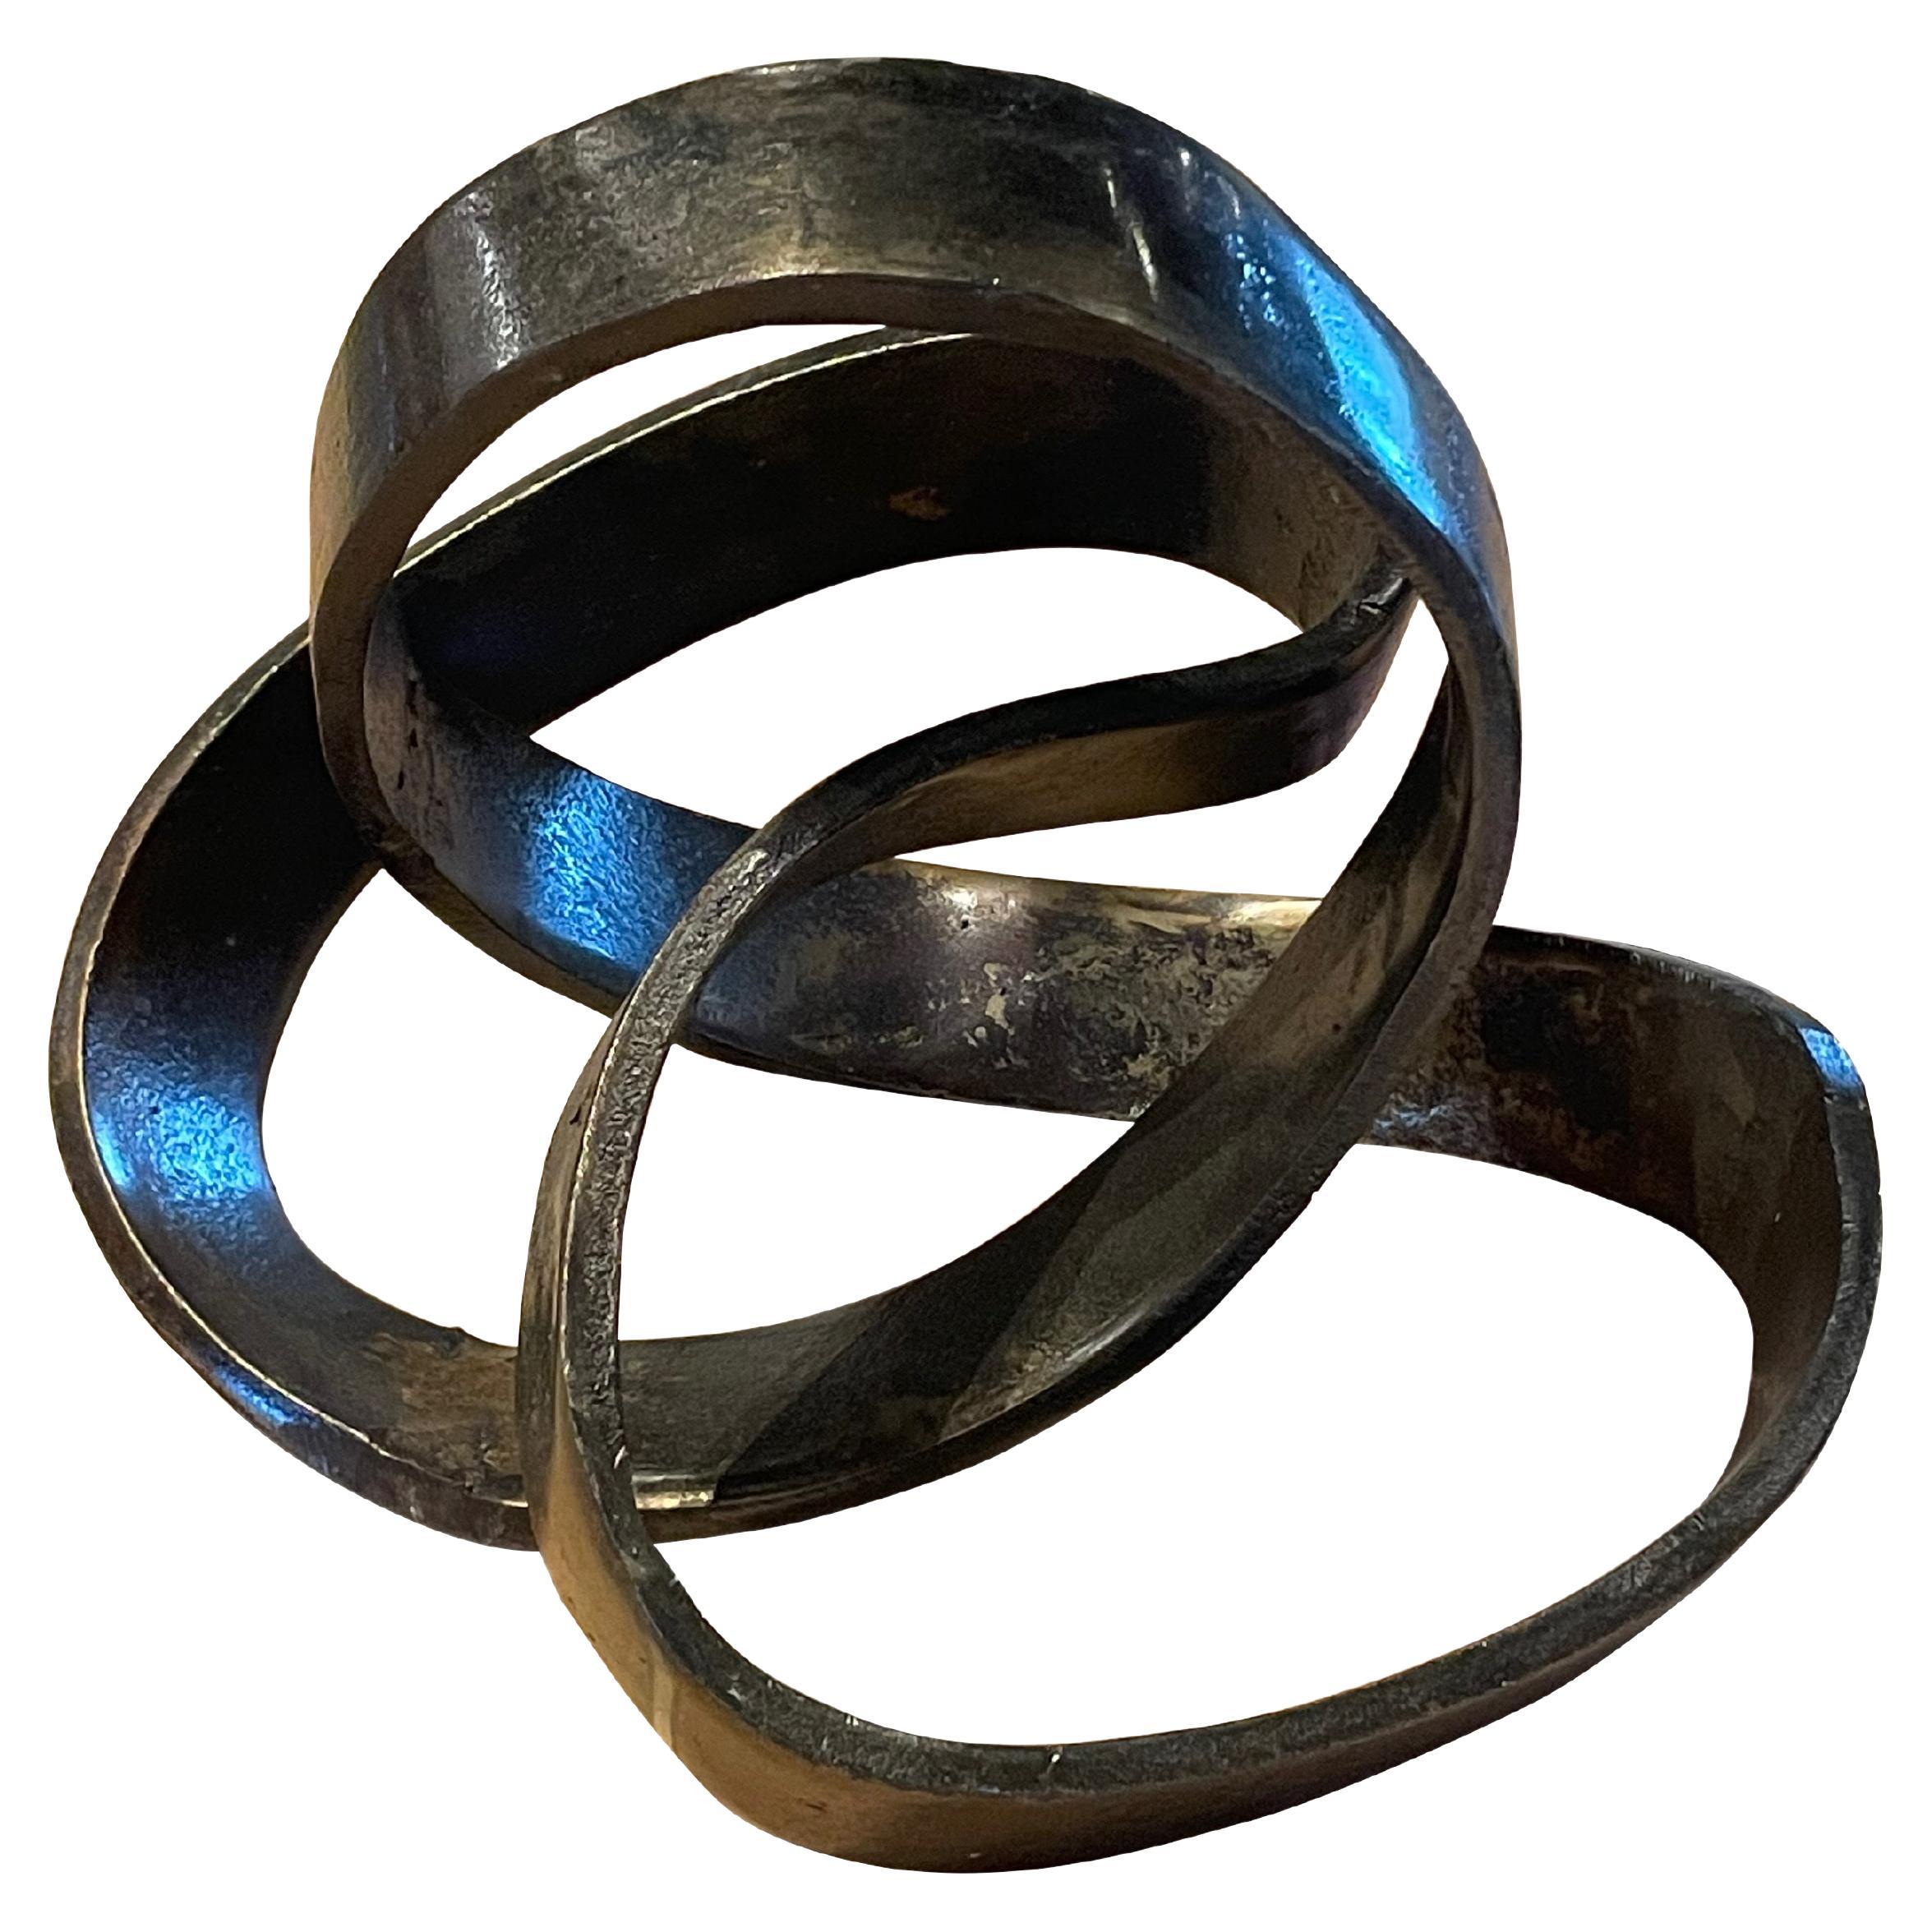 Contemporary Chinese iron ribbon sculpture.
Single band of polished iron bent and shaped to form free floating ribbon sculpture.